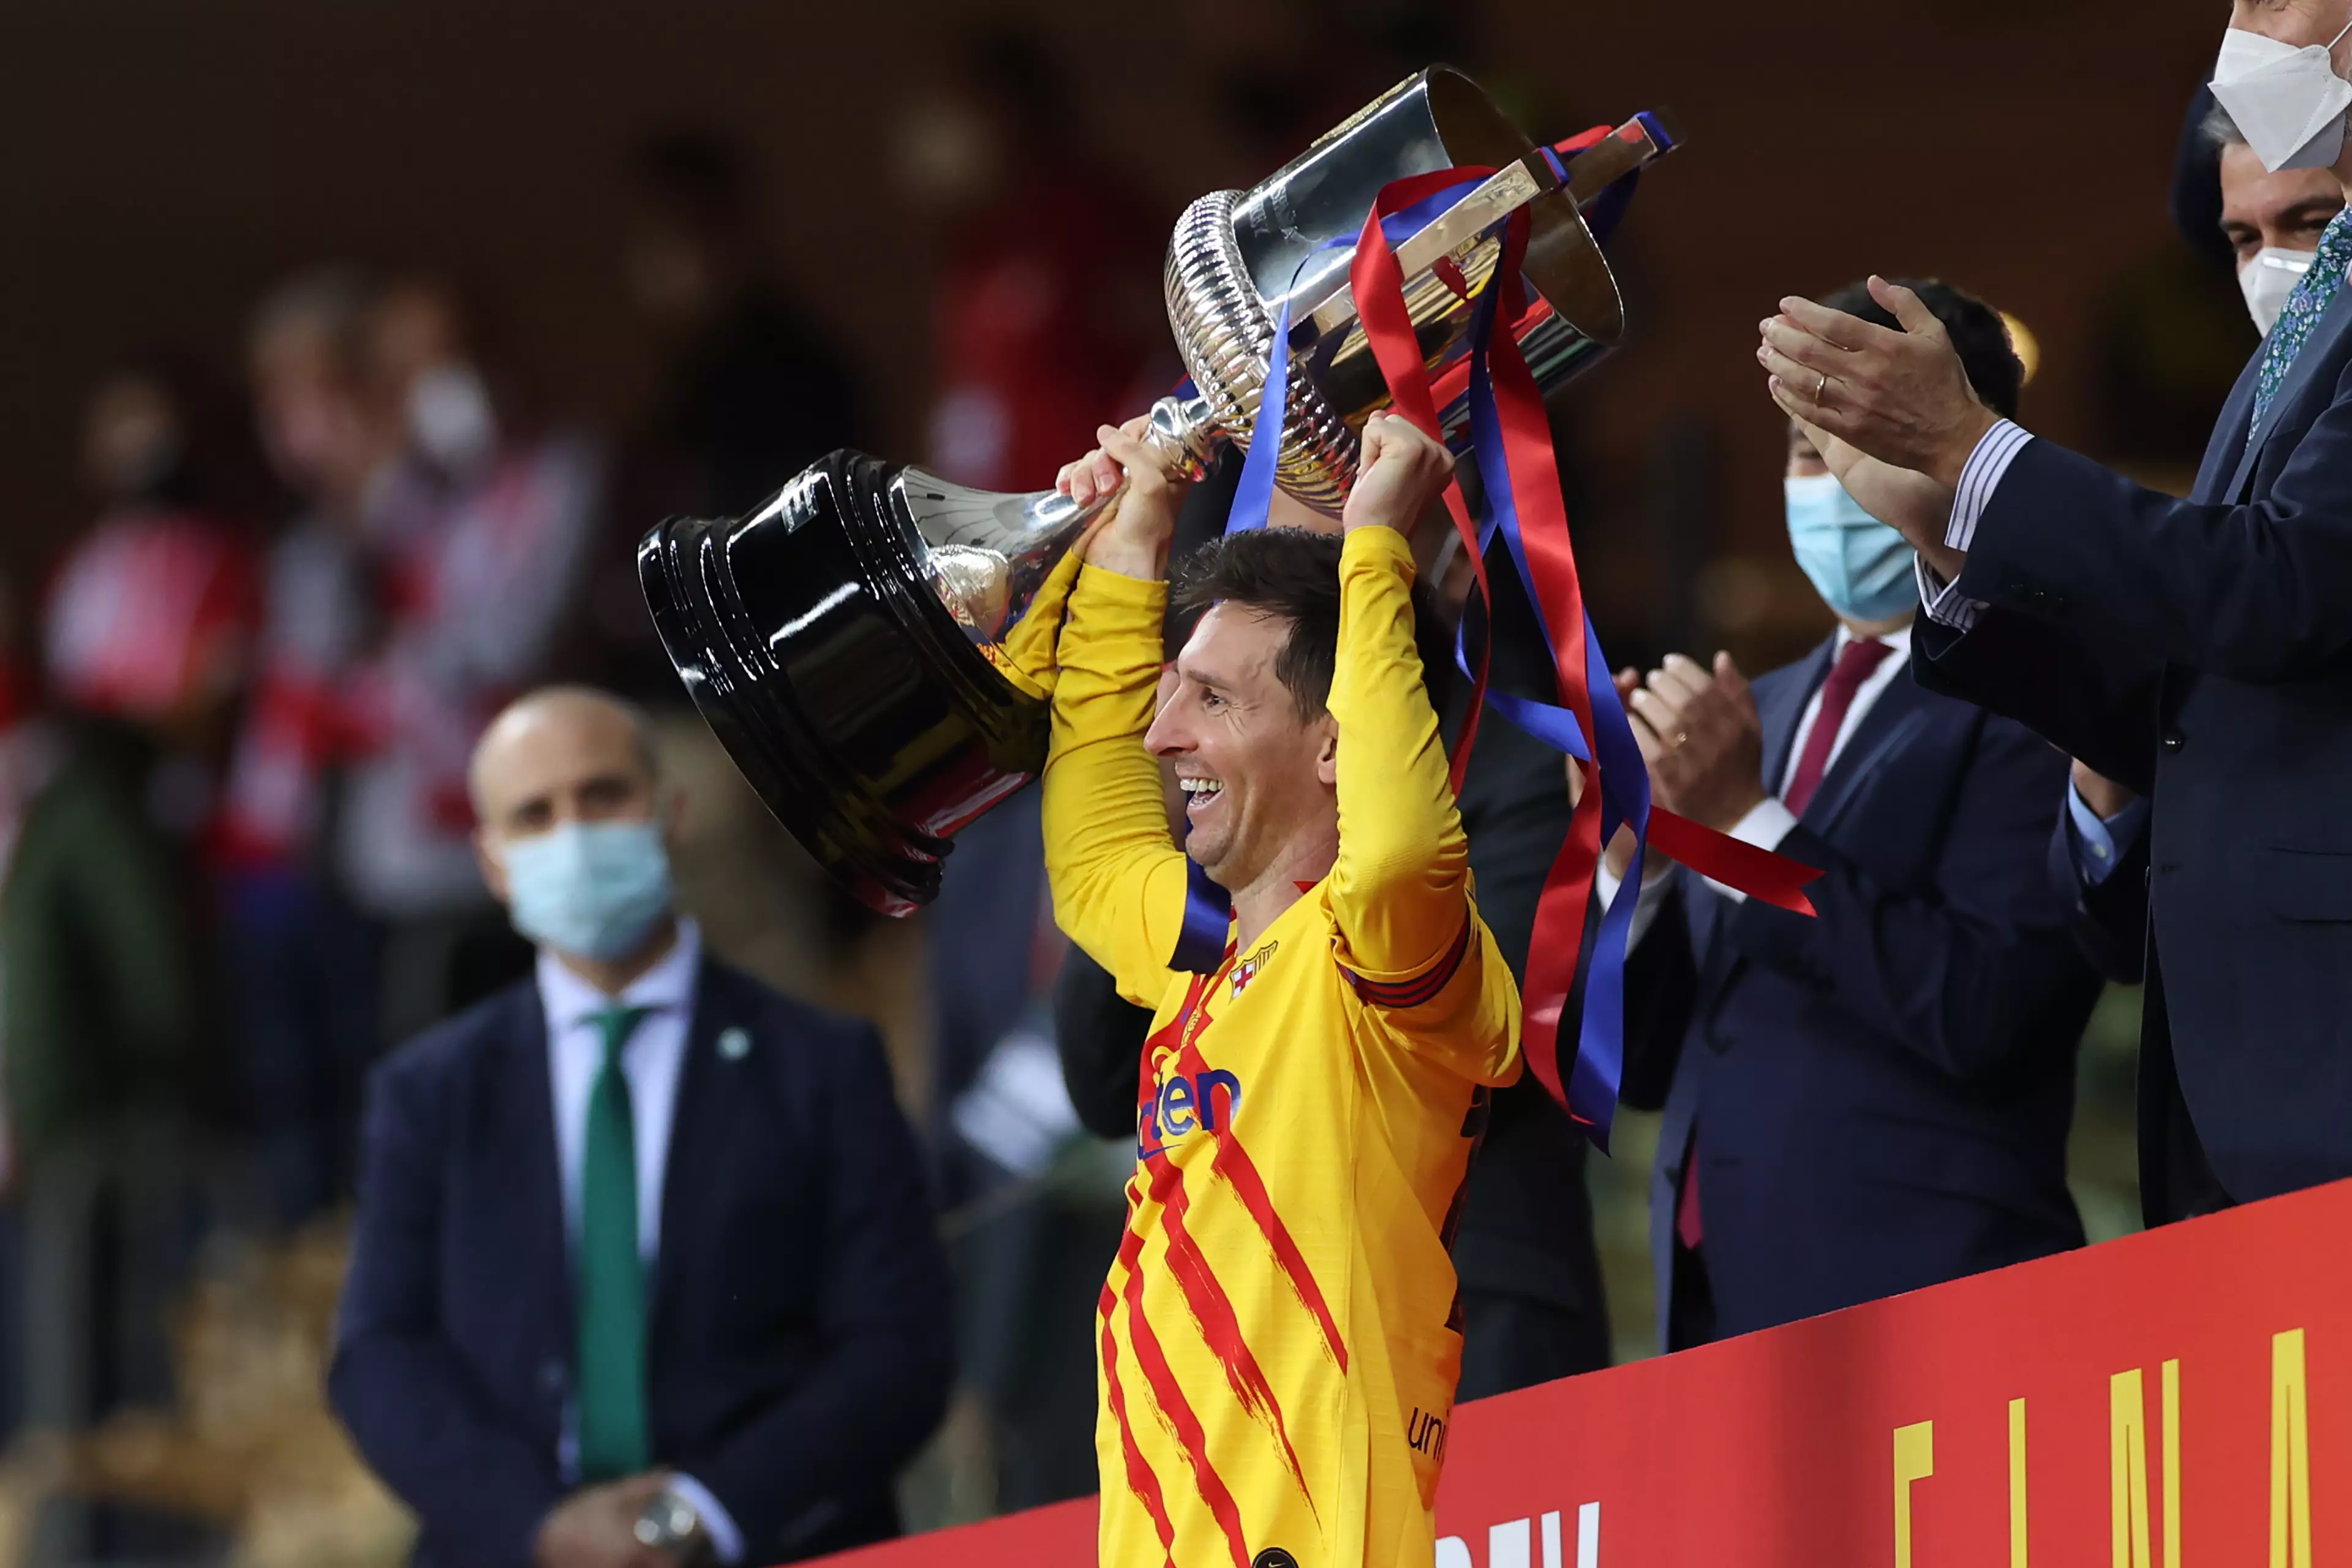 Messi looked extremely happy to lift the Copa del Rey for Barca last season. Image: PA Images